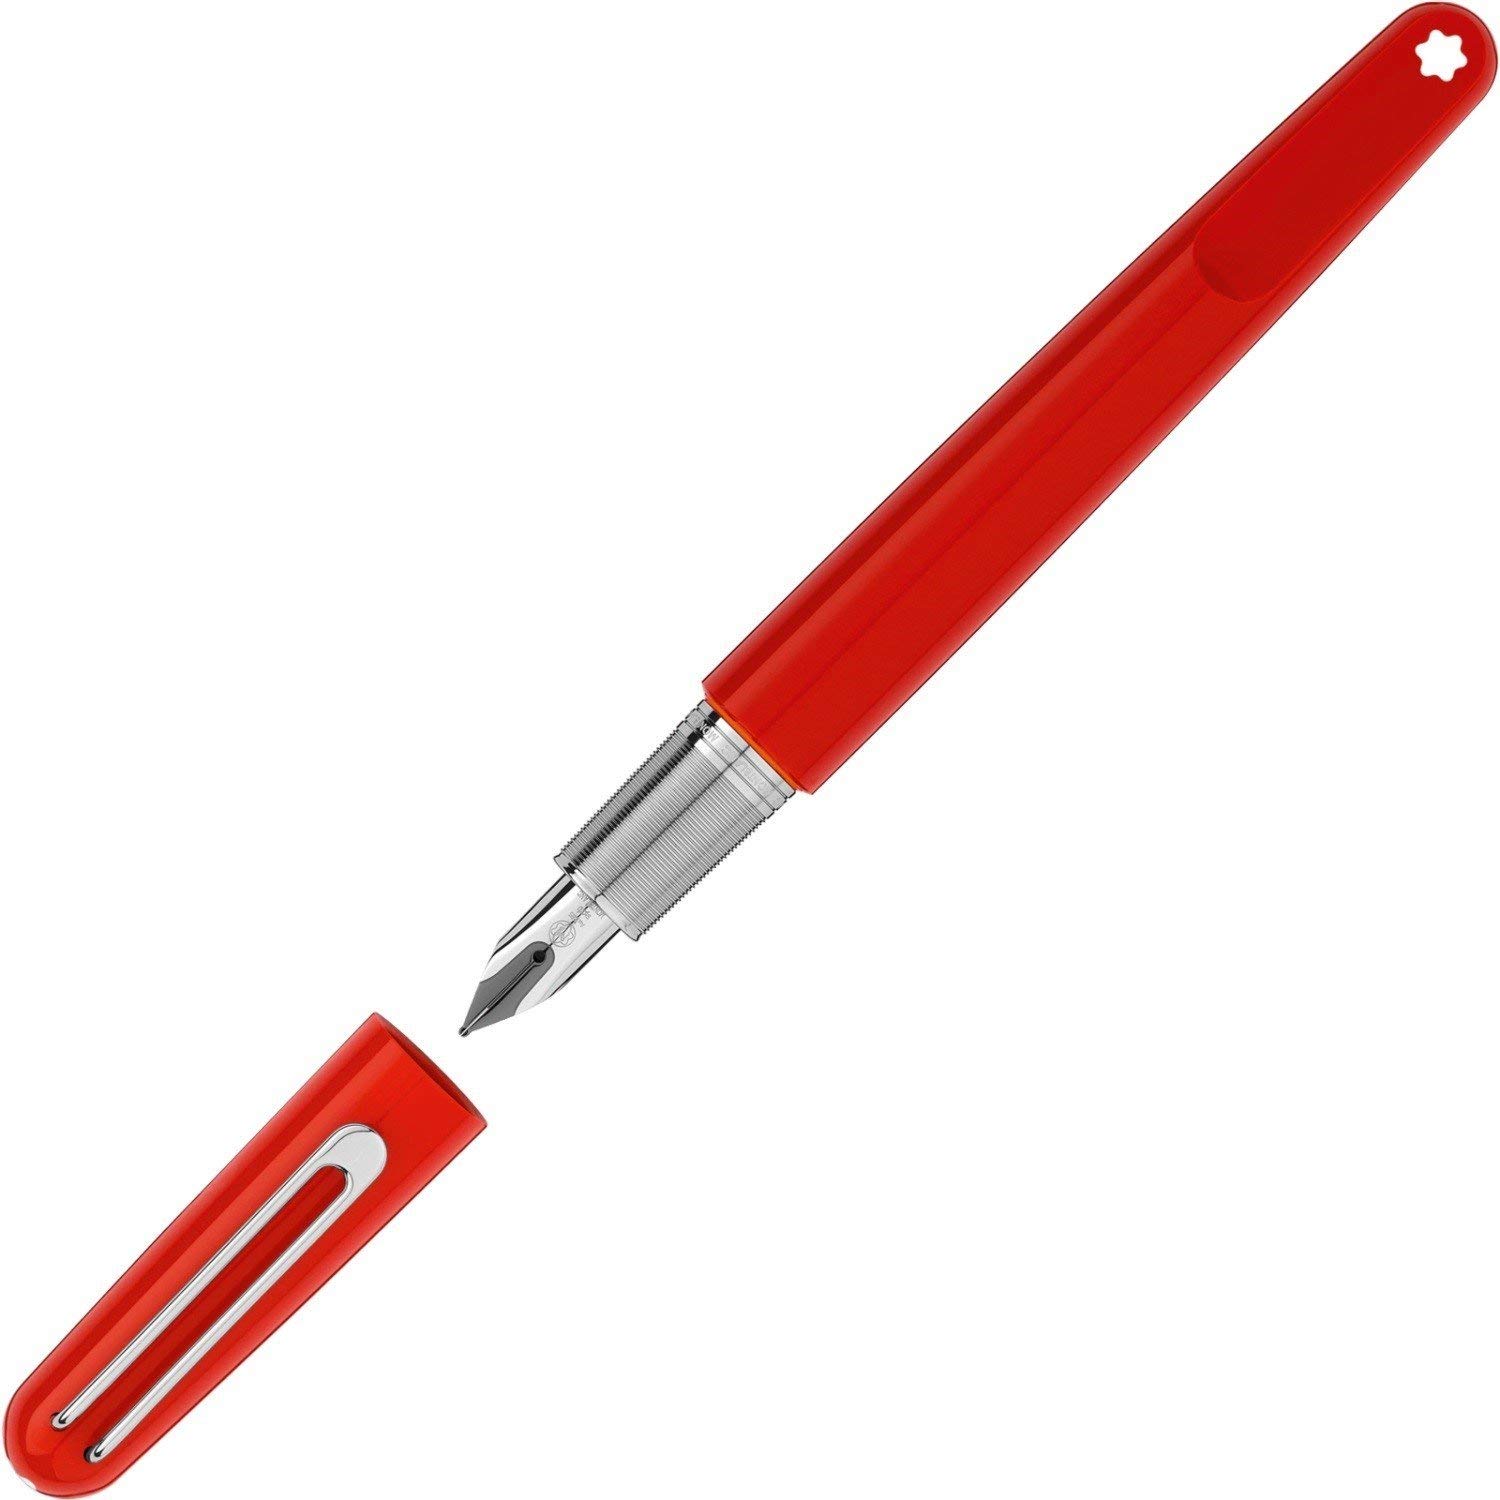 Montblanc Mechanical Pencil and Feathers Model FP Montblanc M (RED) Special Edition F